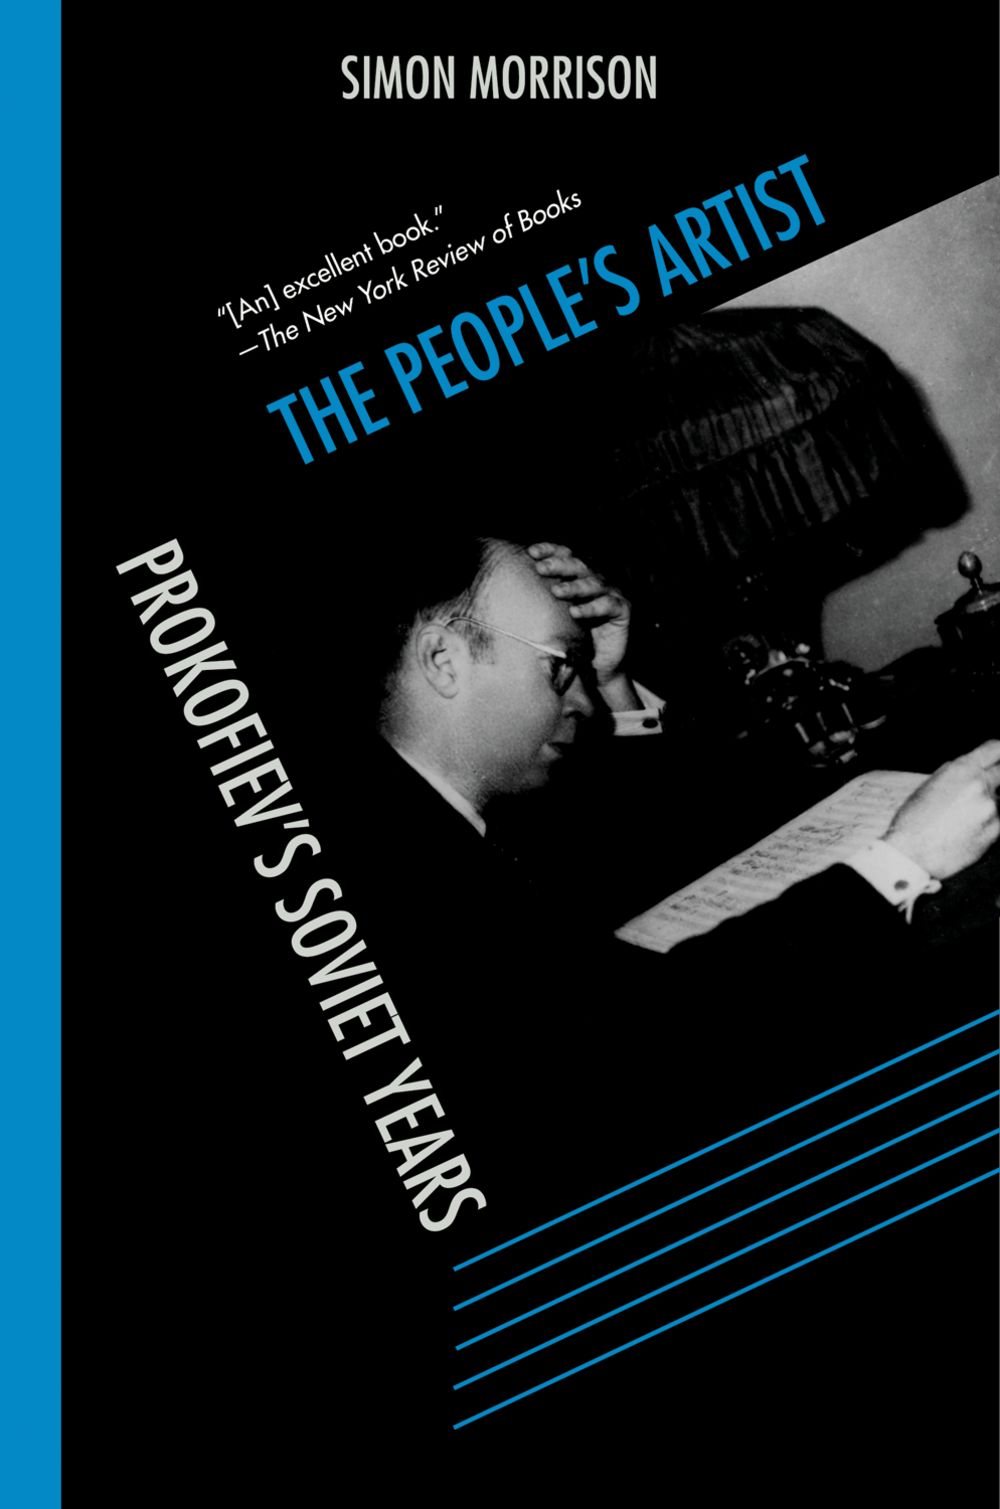 Morrison The Peoples Artist Paperback Sheet Music Songbook